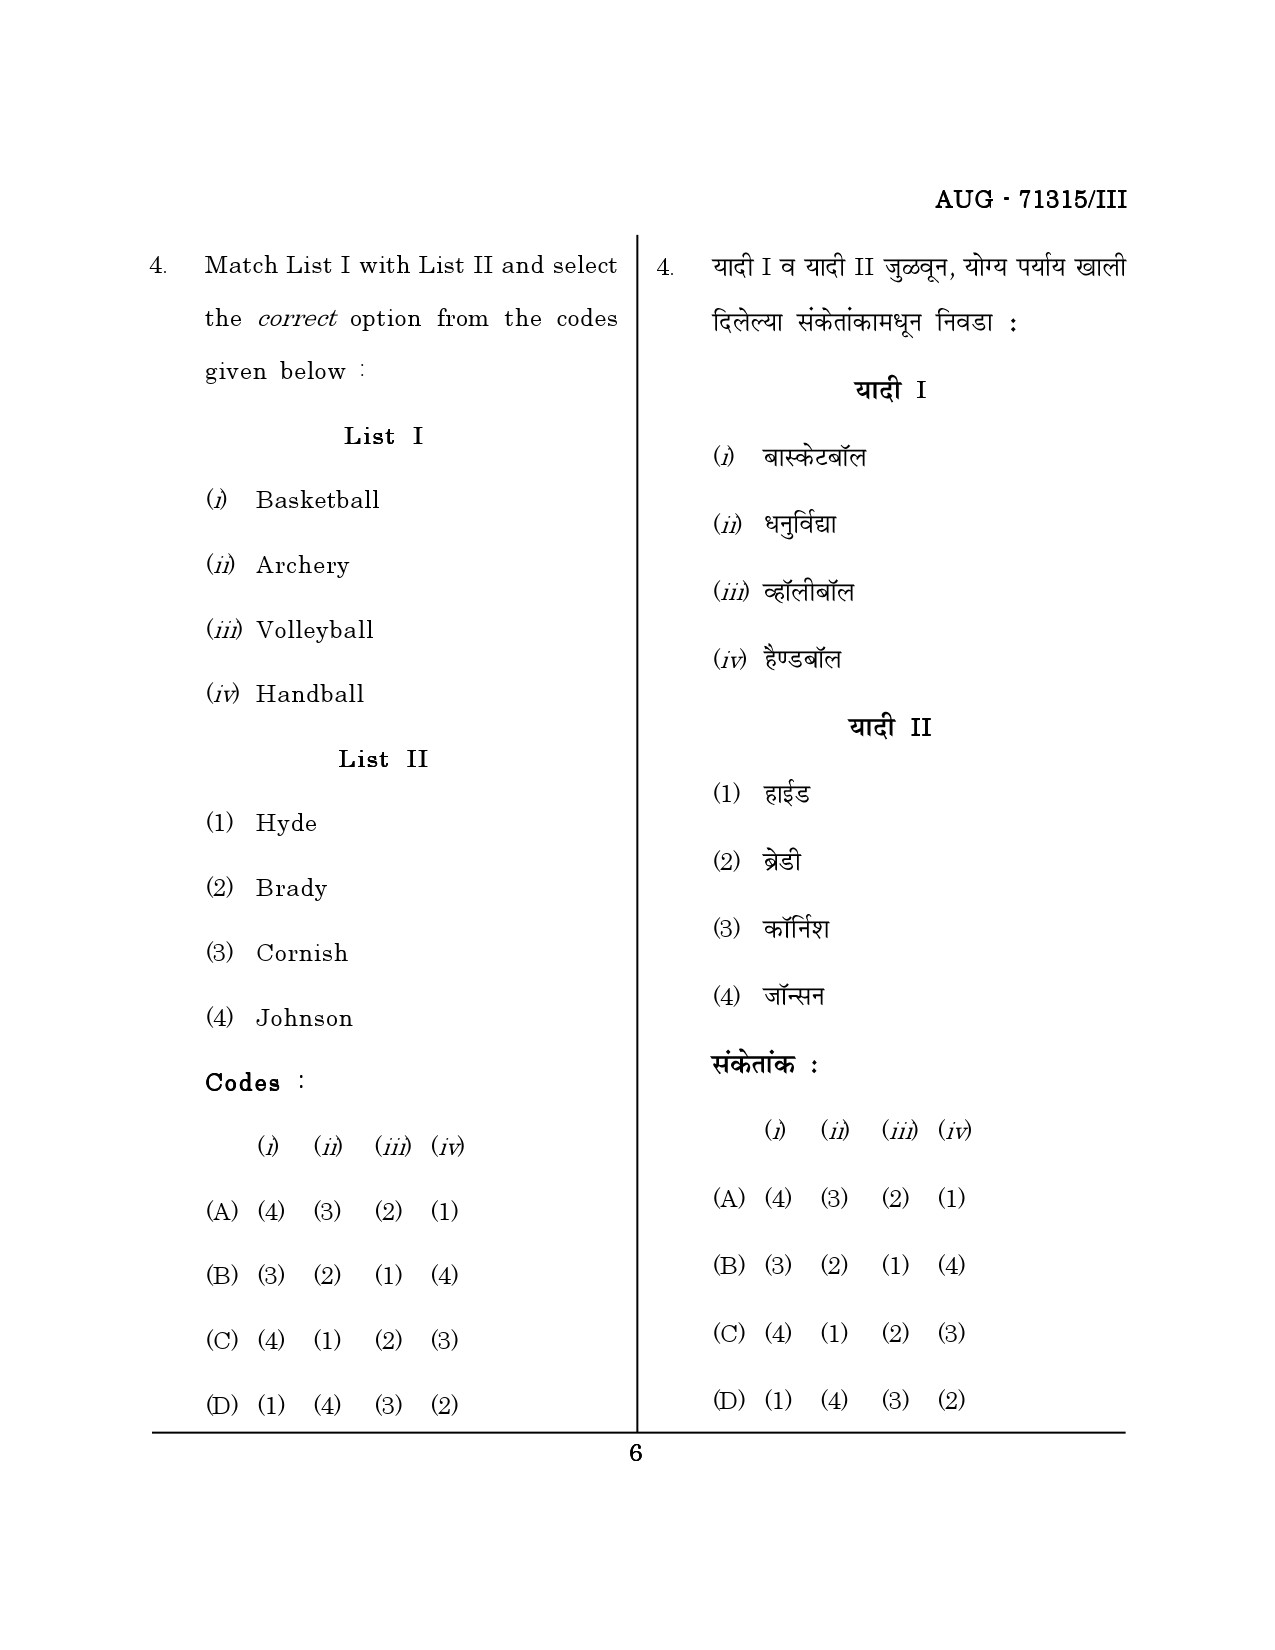 Maharashtra SET Physical Education Question Paper III August 2015 5